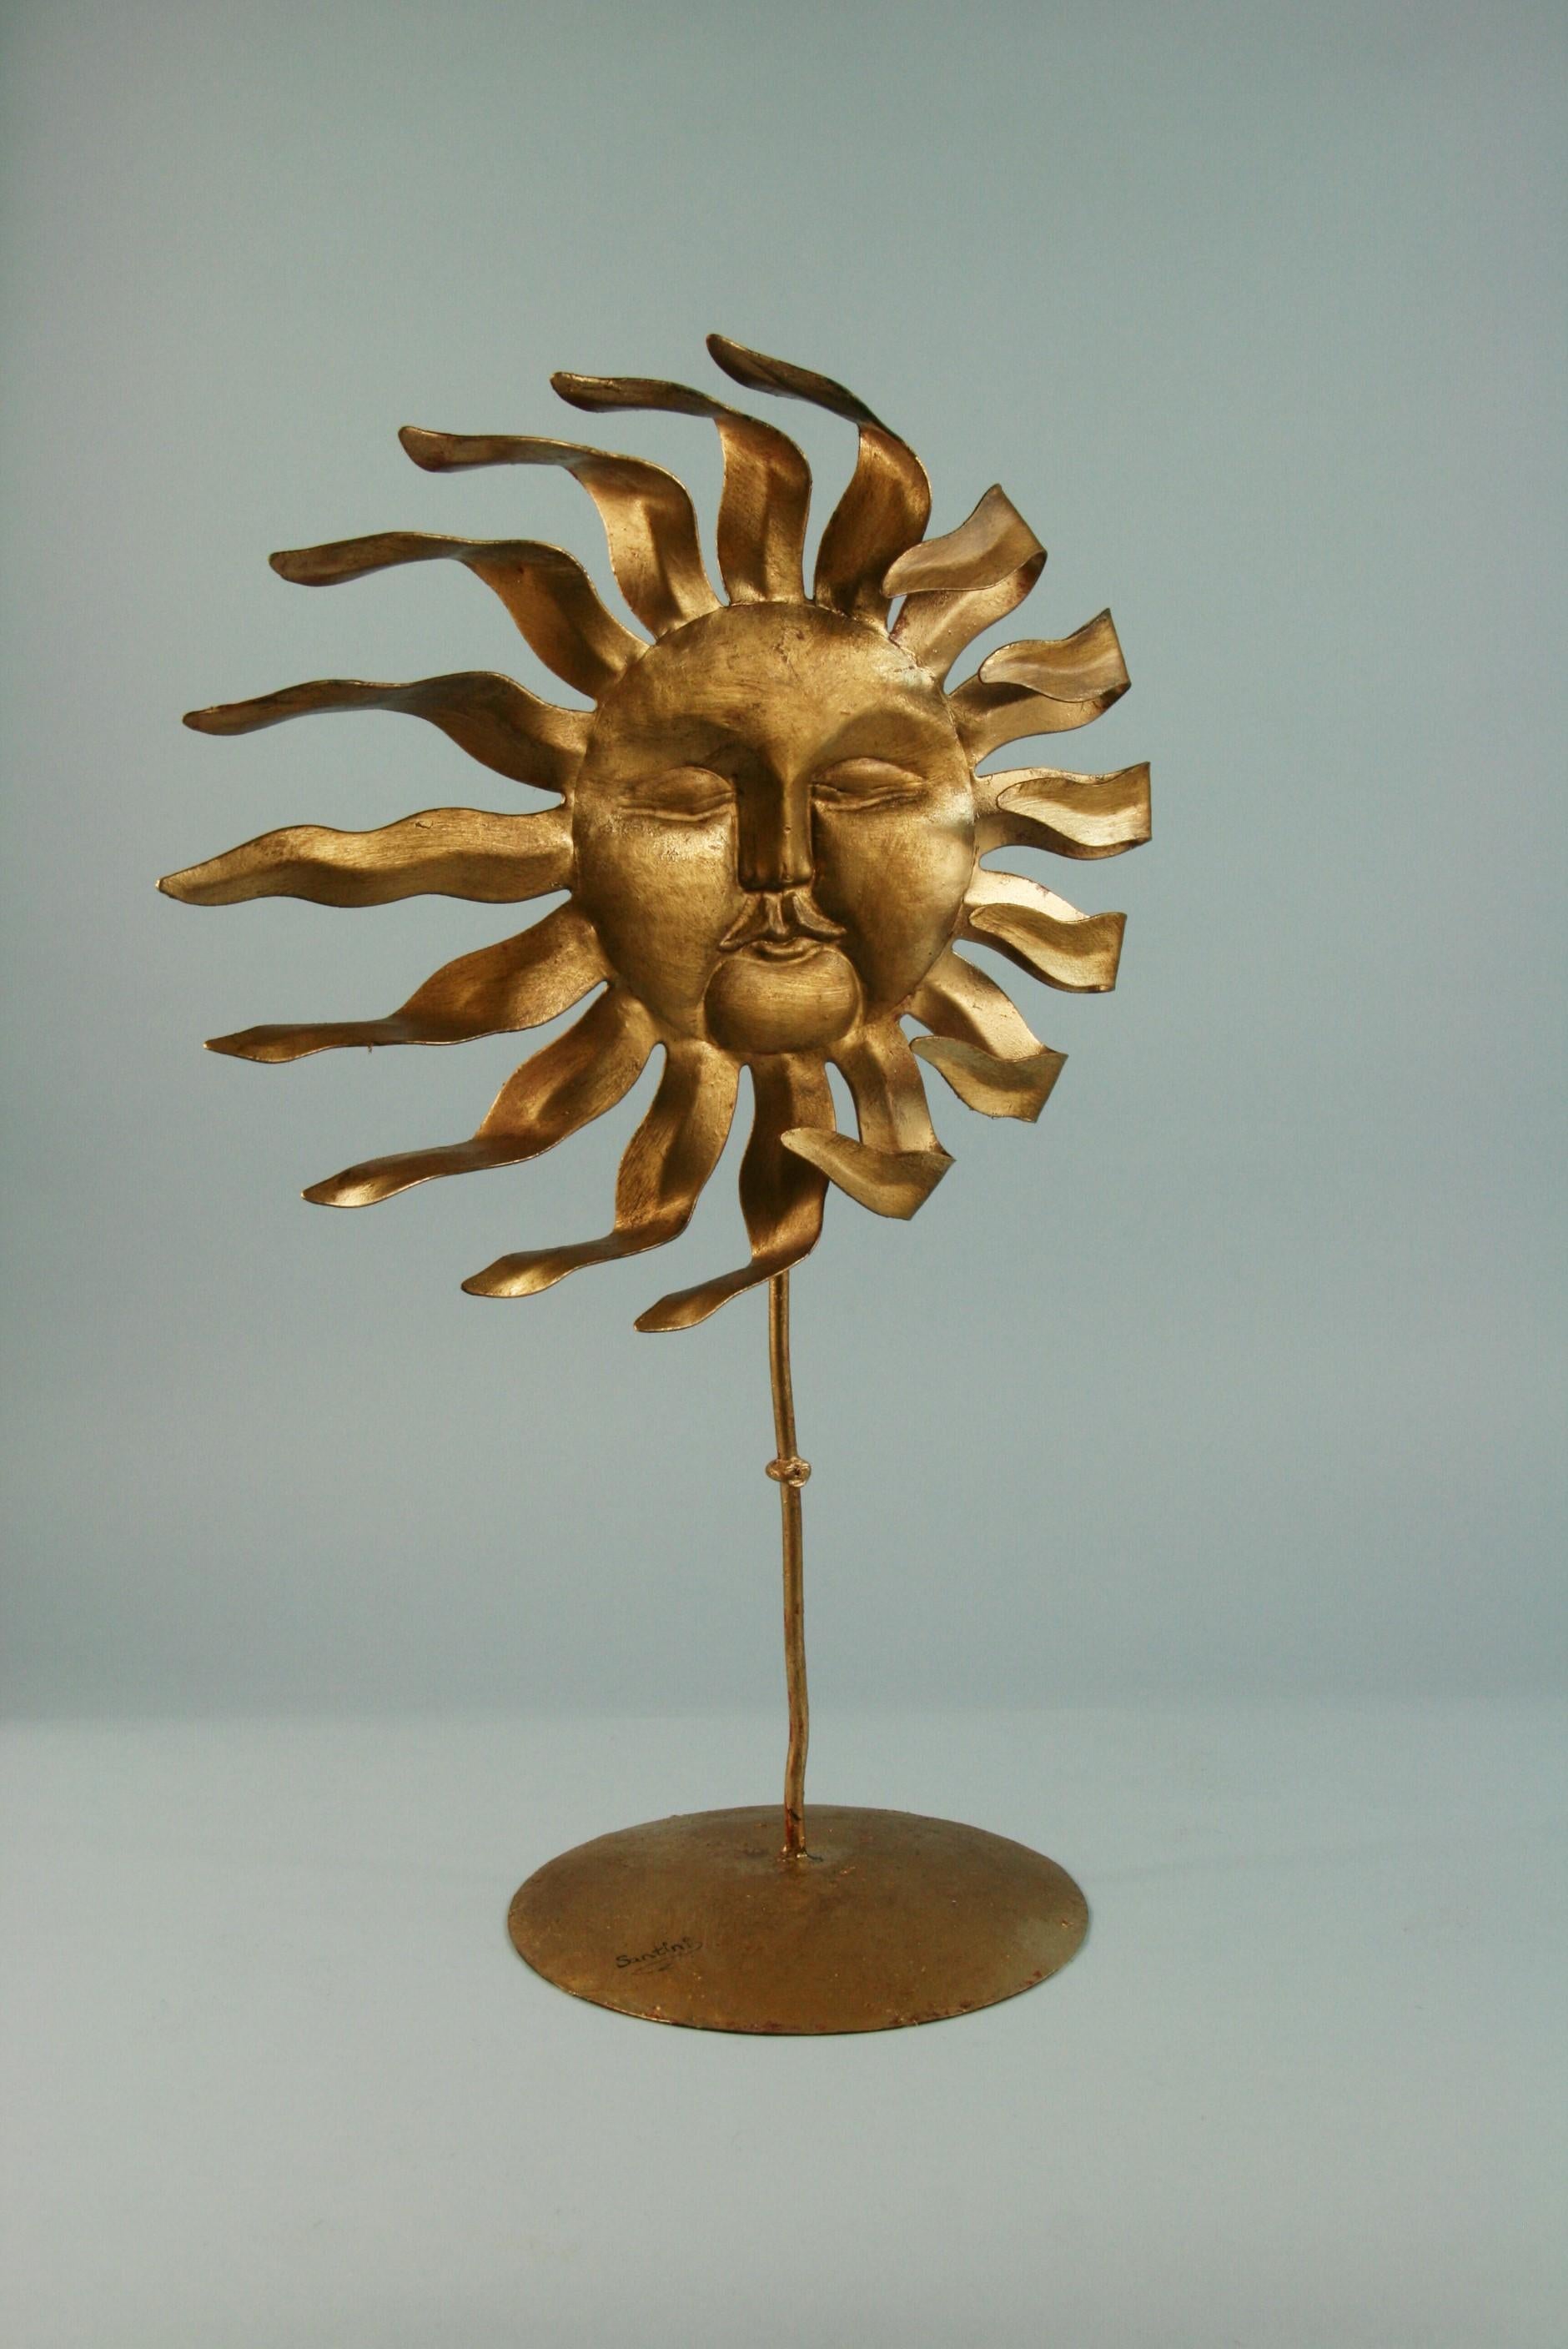 3-487 hand made metal sculpture sun in the wind by Santini.